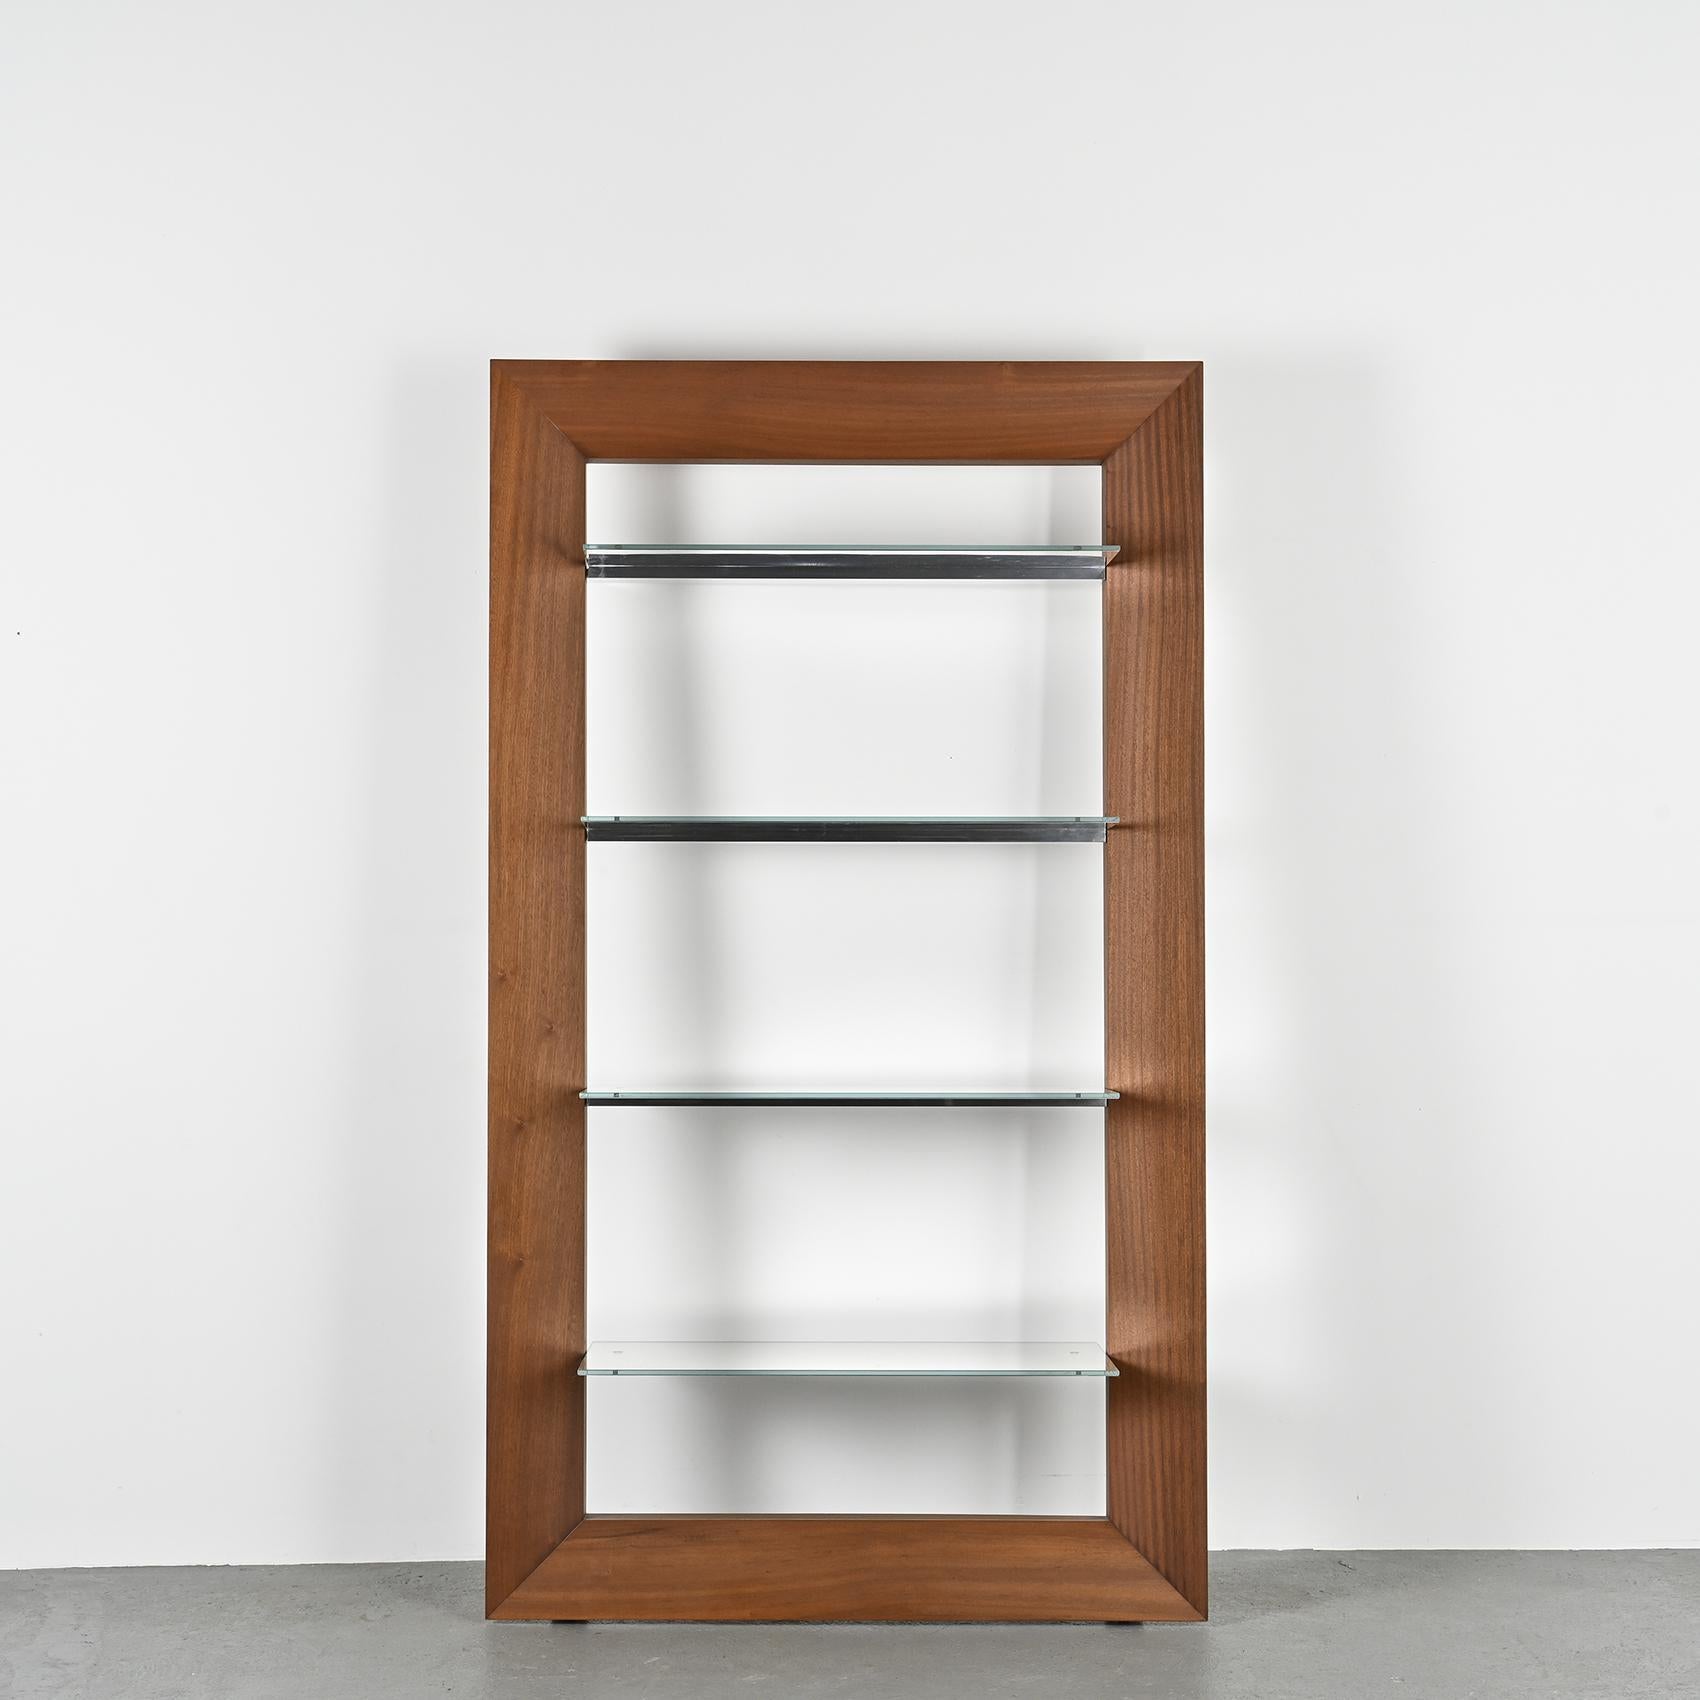 Modular Mirror-Bookshelves by Philippe Starck, Driade 2007 For Sale 4